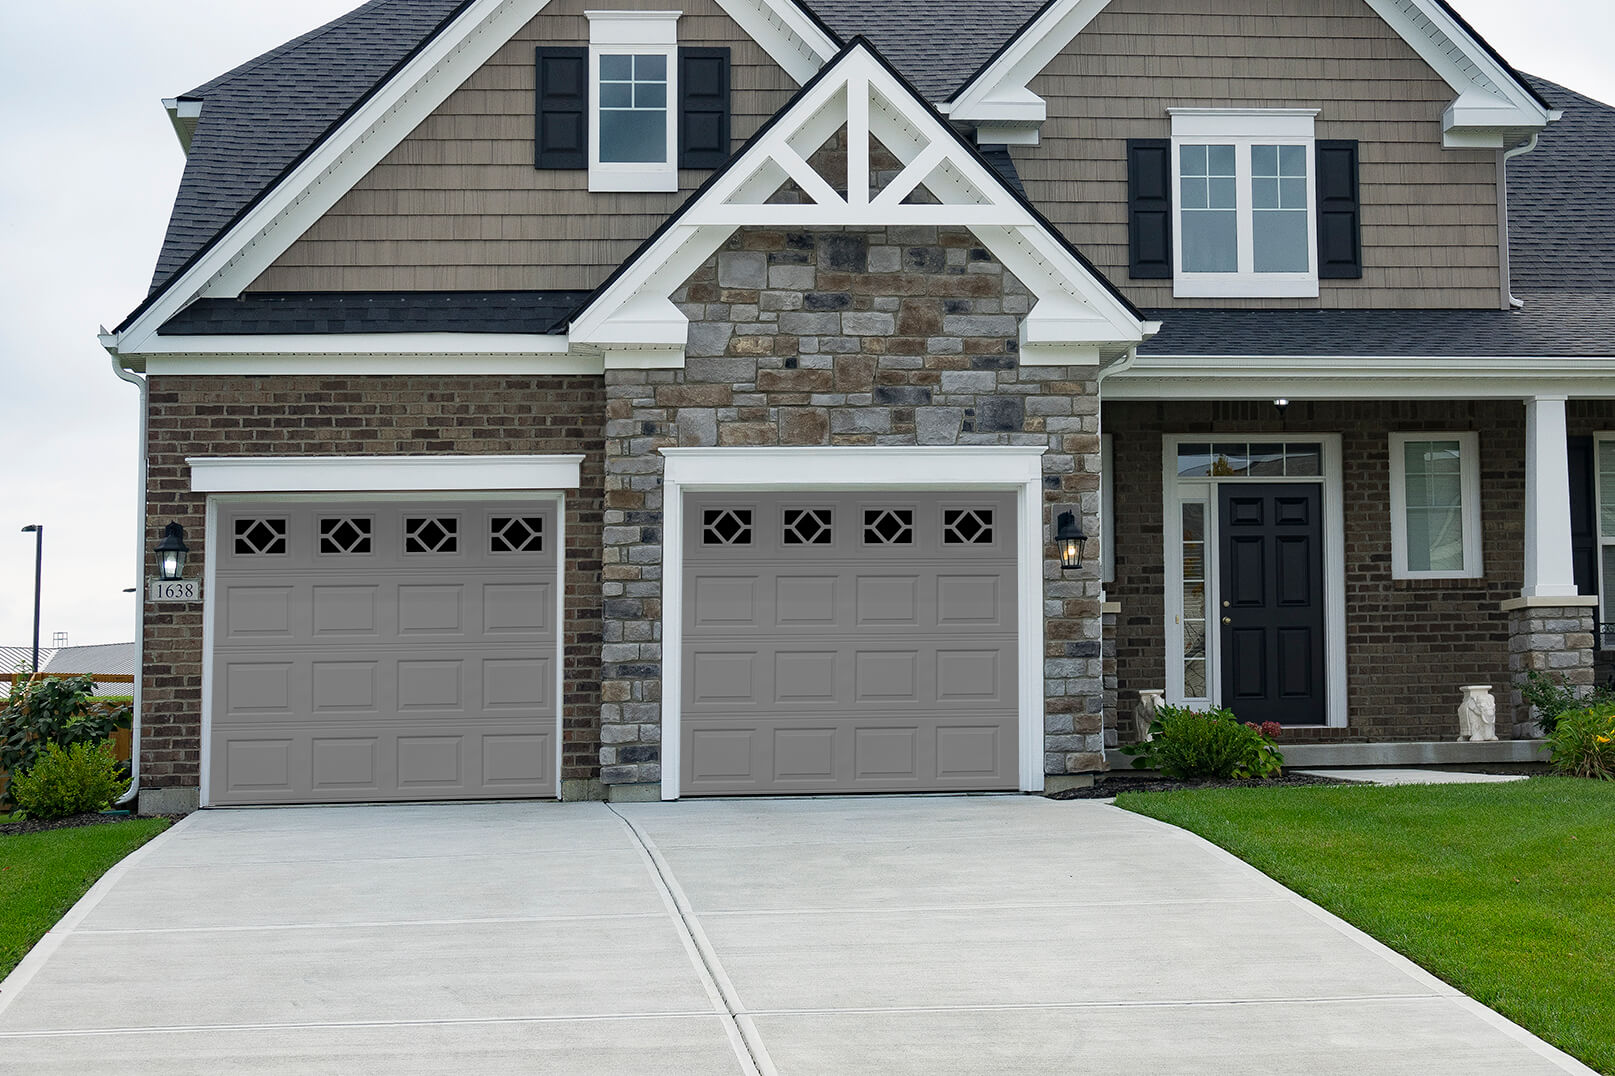 Garage door replacement- Essential factors to consider before making a decision